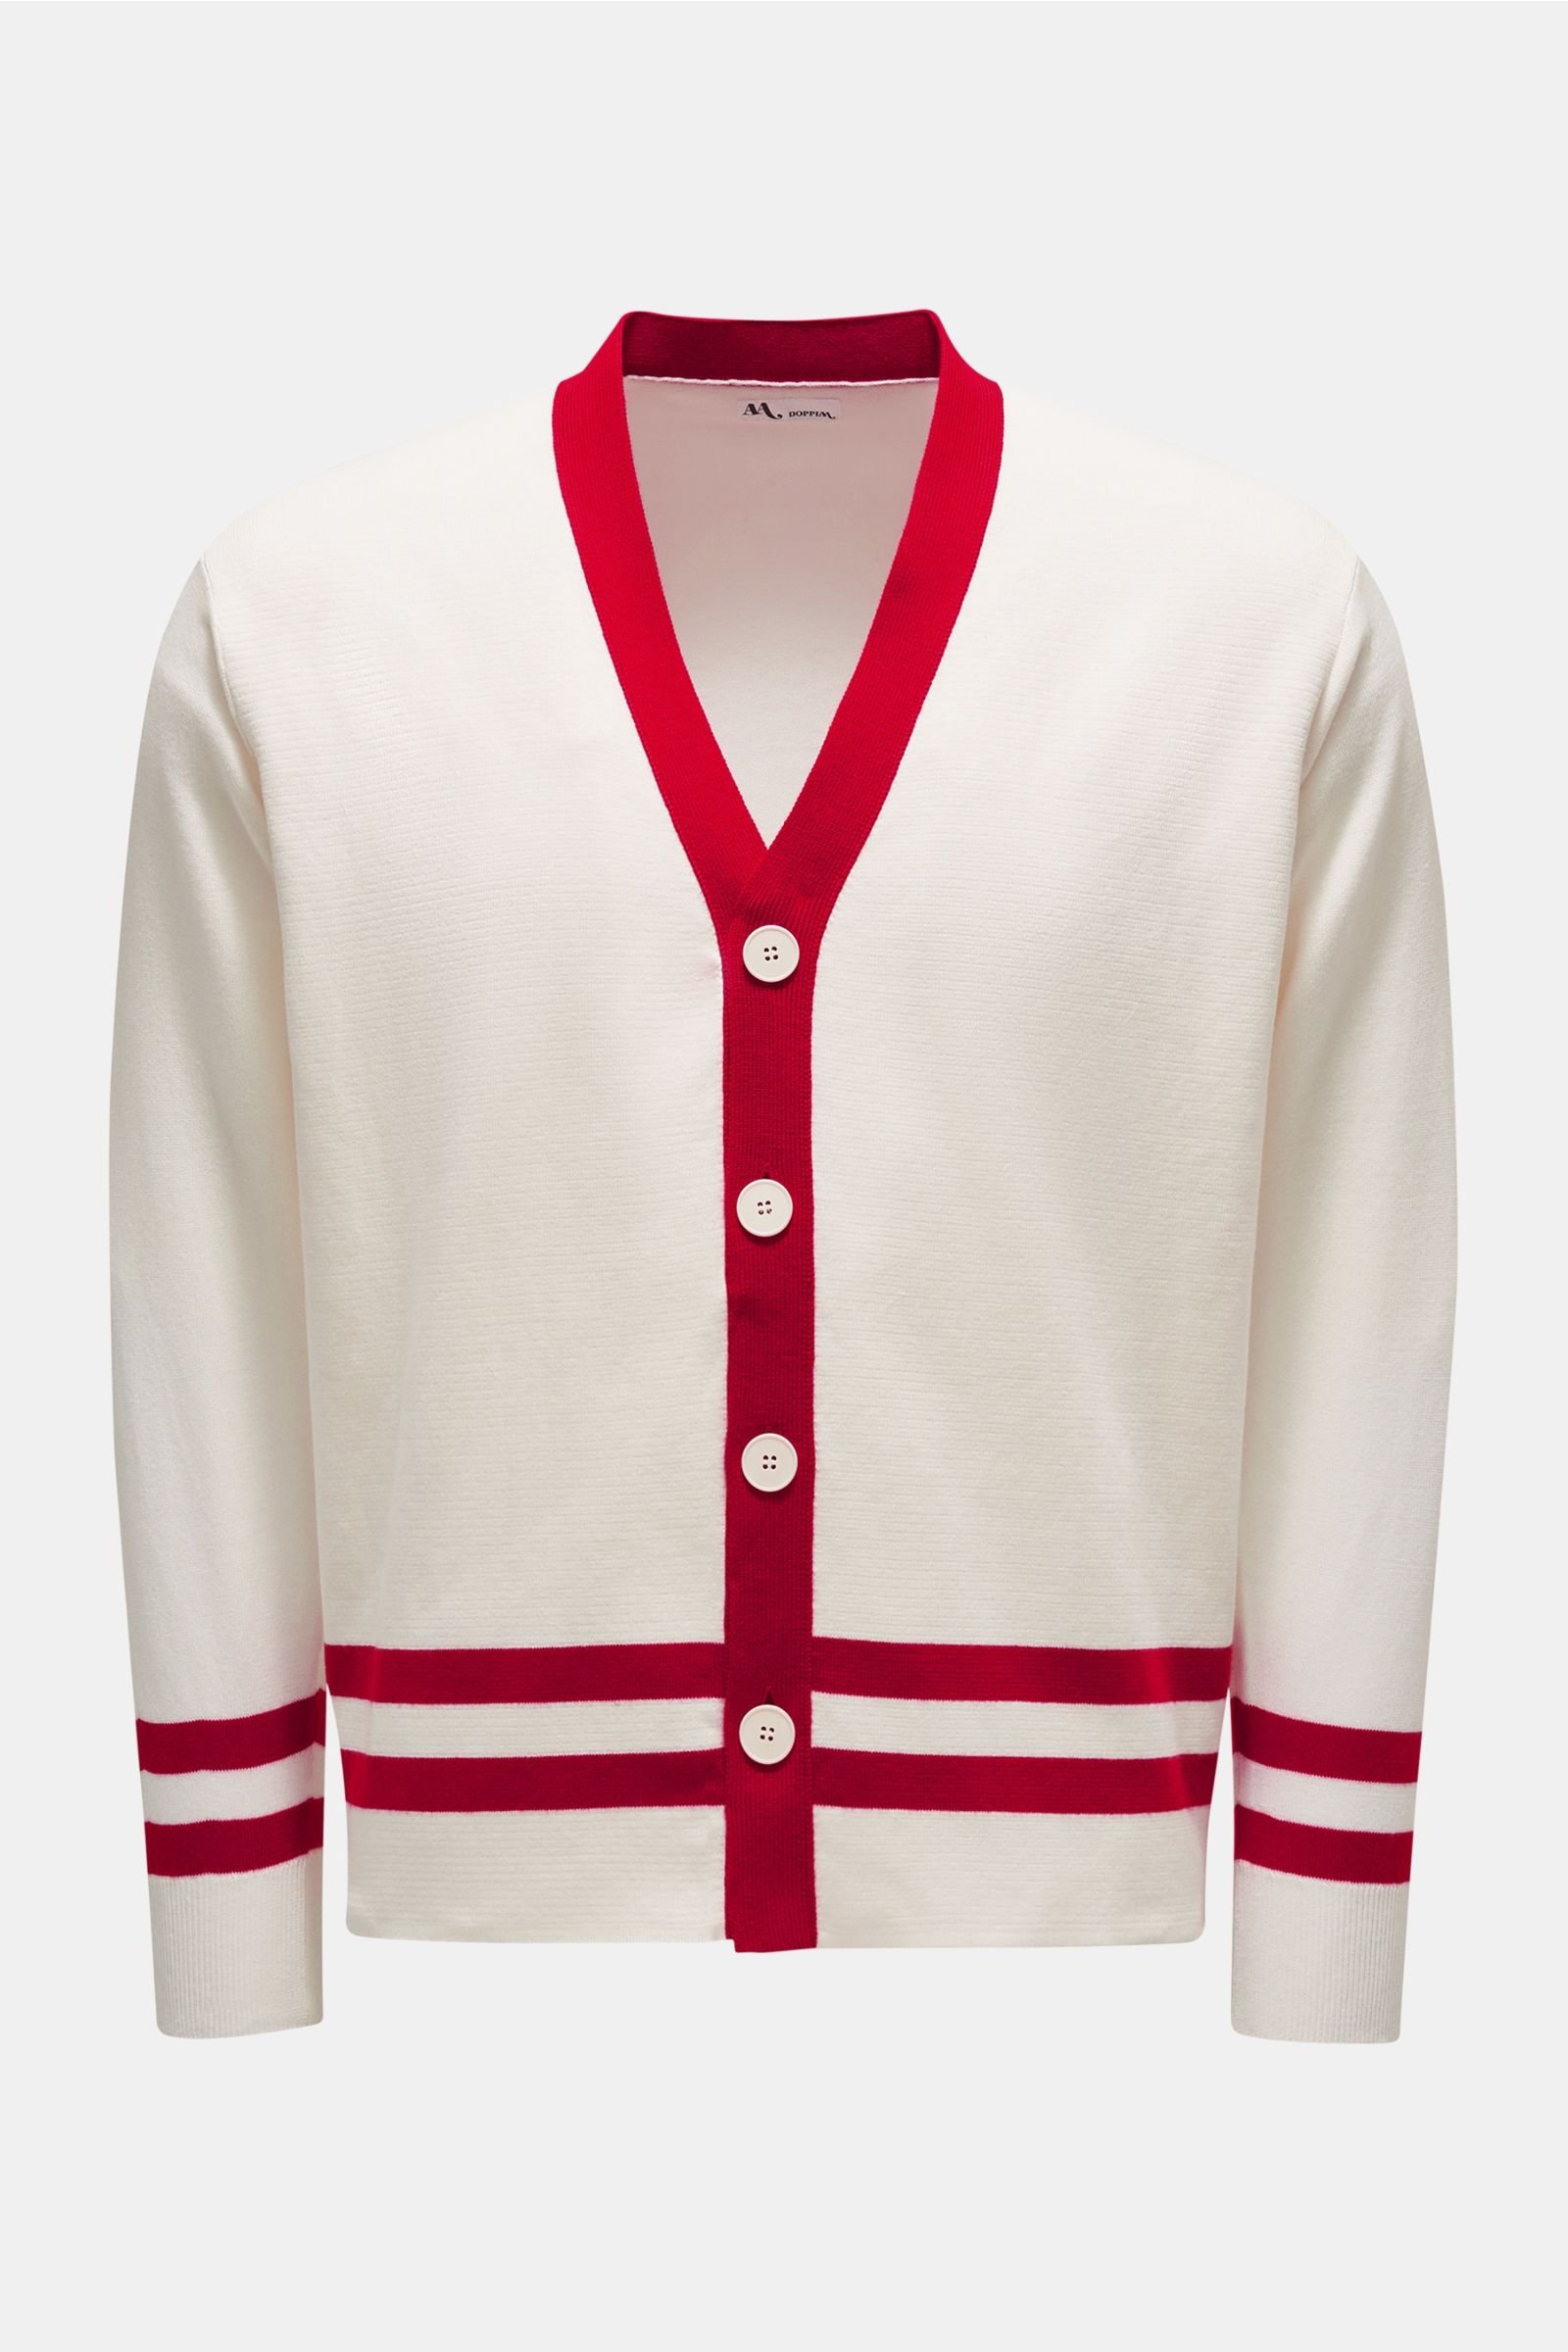 Cardigan 'Aanfitrione' red/off-white